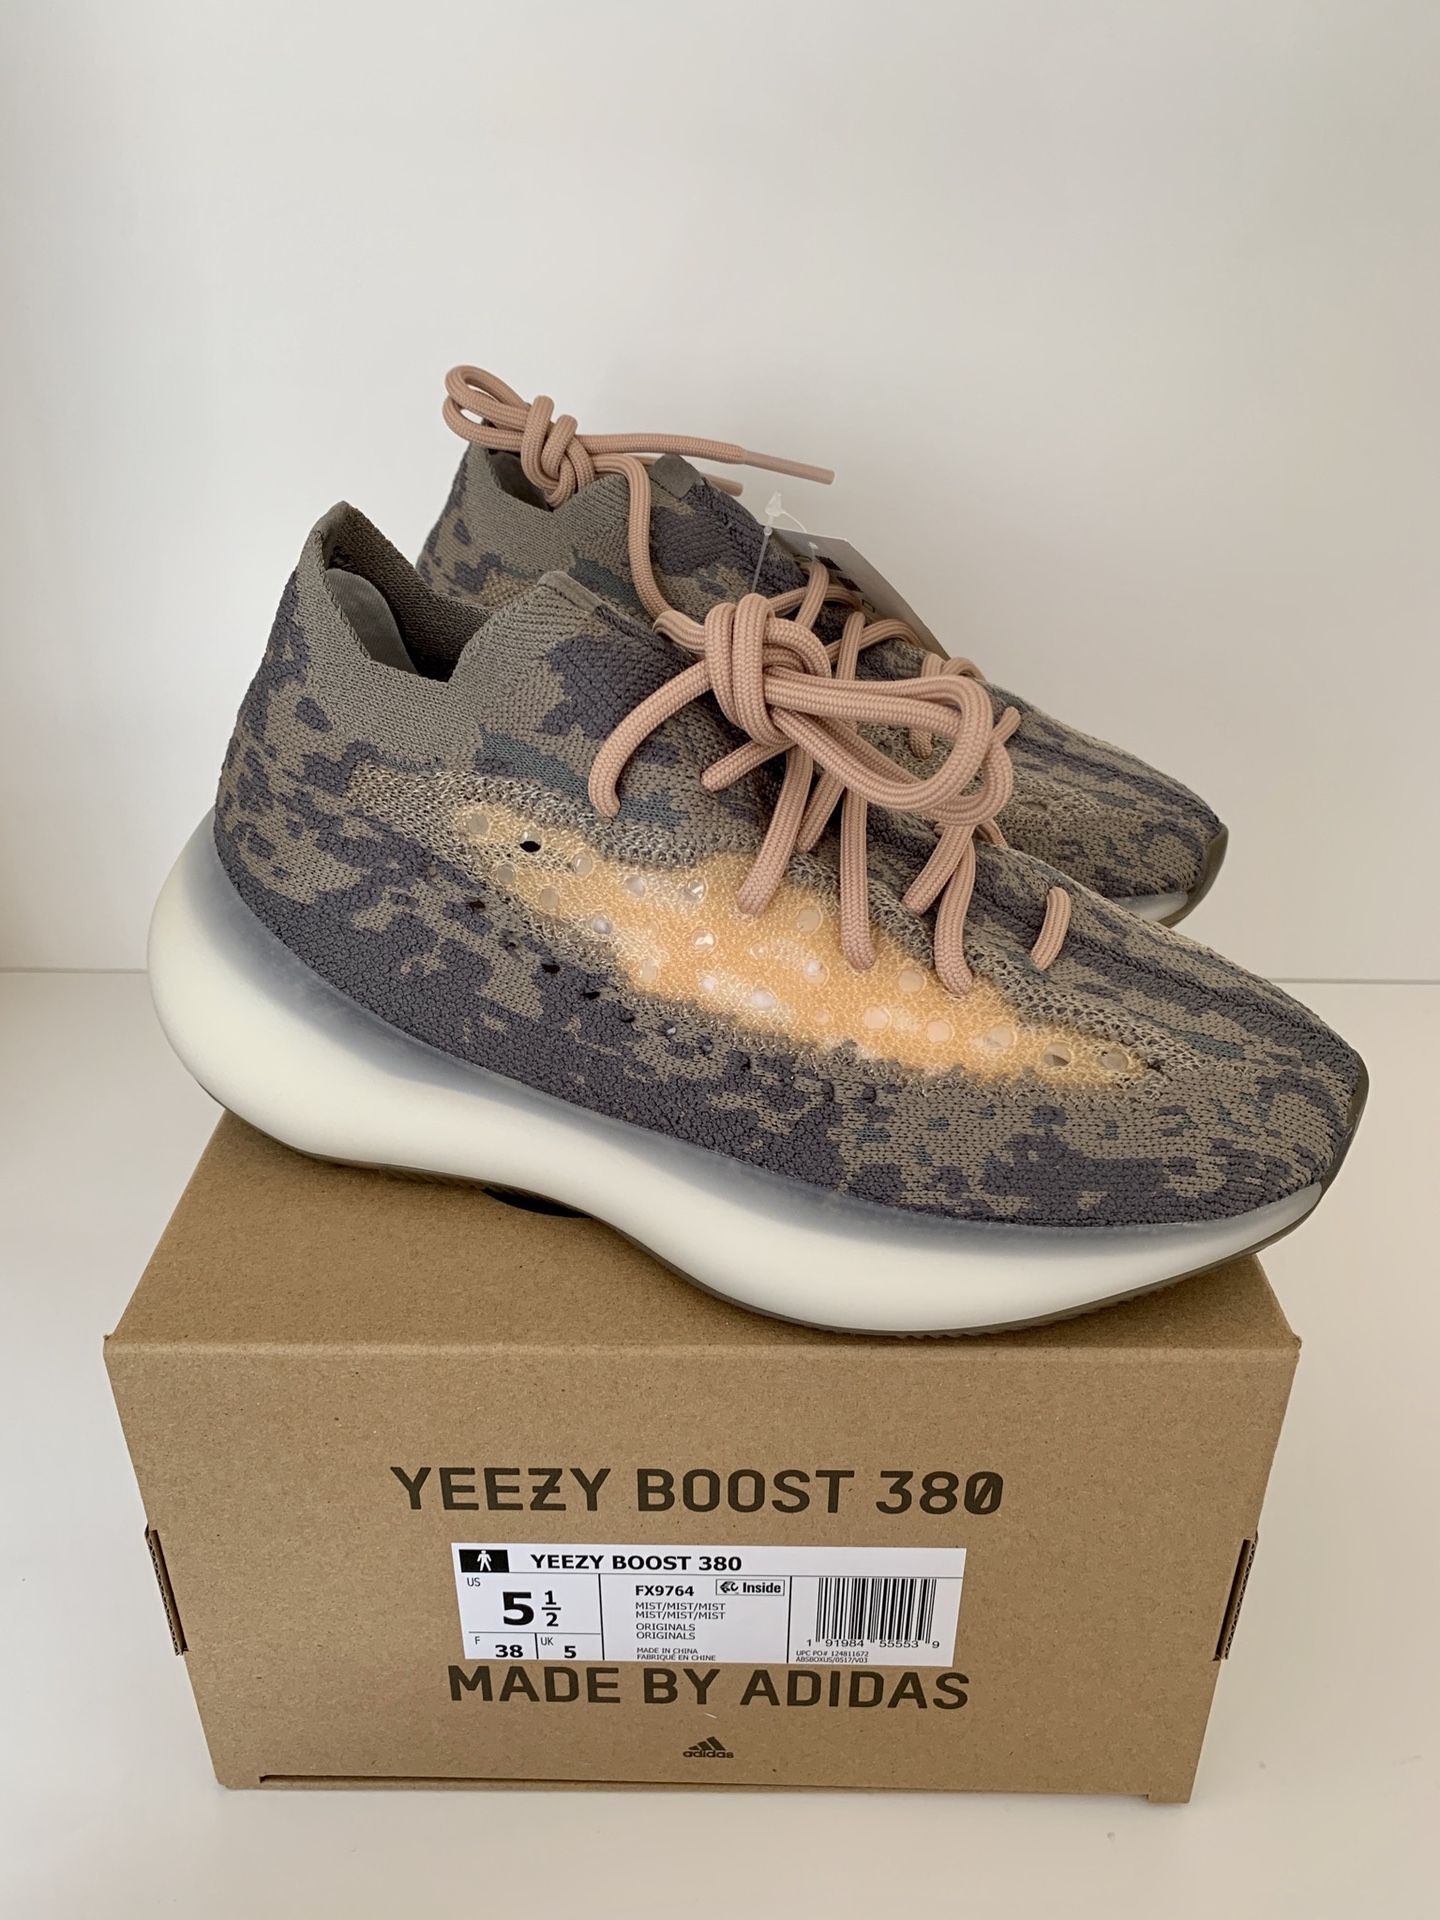 adidas Yeezy Boost 380 Mist Athletic Shoes Mens Size 5.5 Brown Tan Gray Non RF